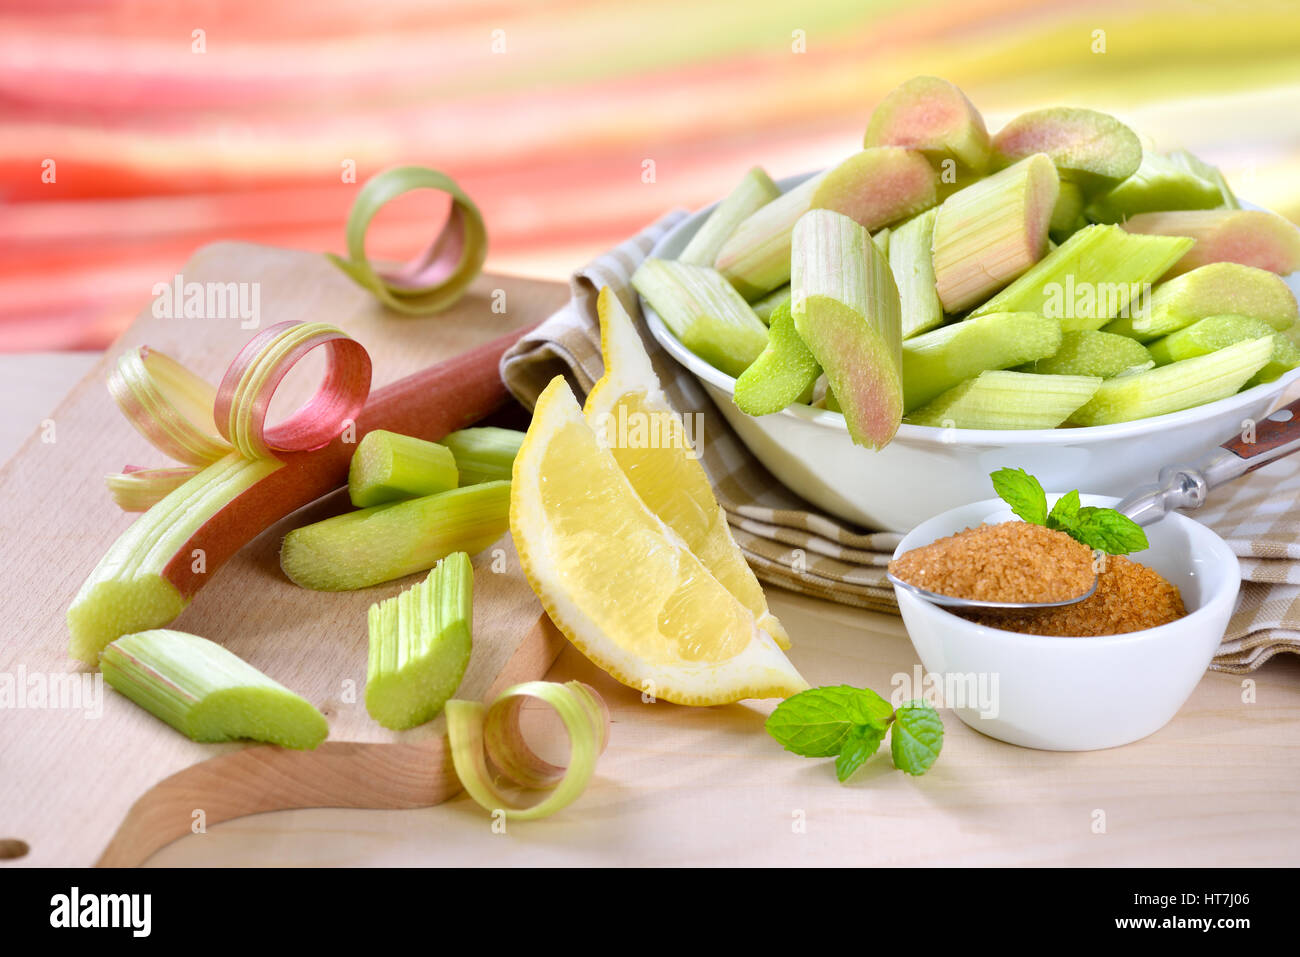 Peeled and chopped raw rhubarb prepared for cooking compote with brown sugar and lemon, in the background other rhubarb stalks in soft focus Stock Photo